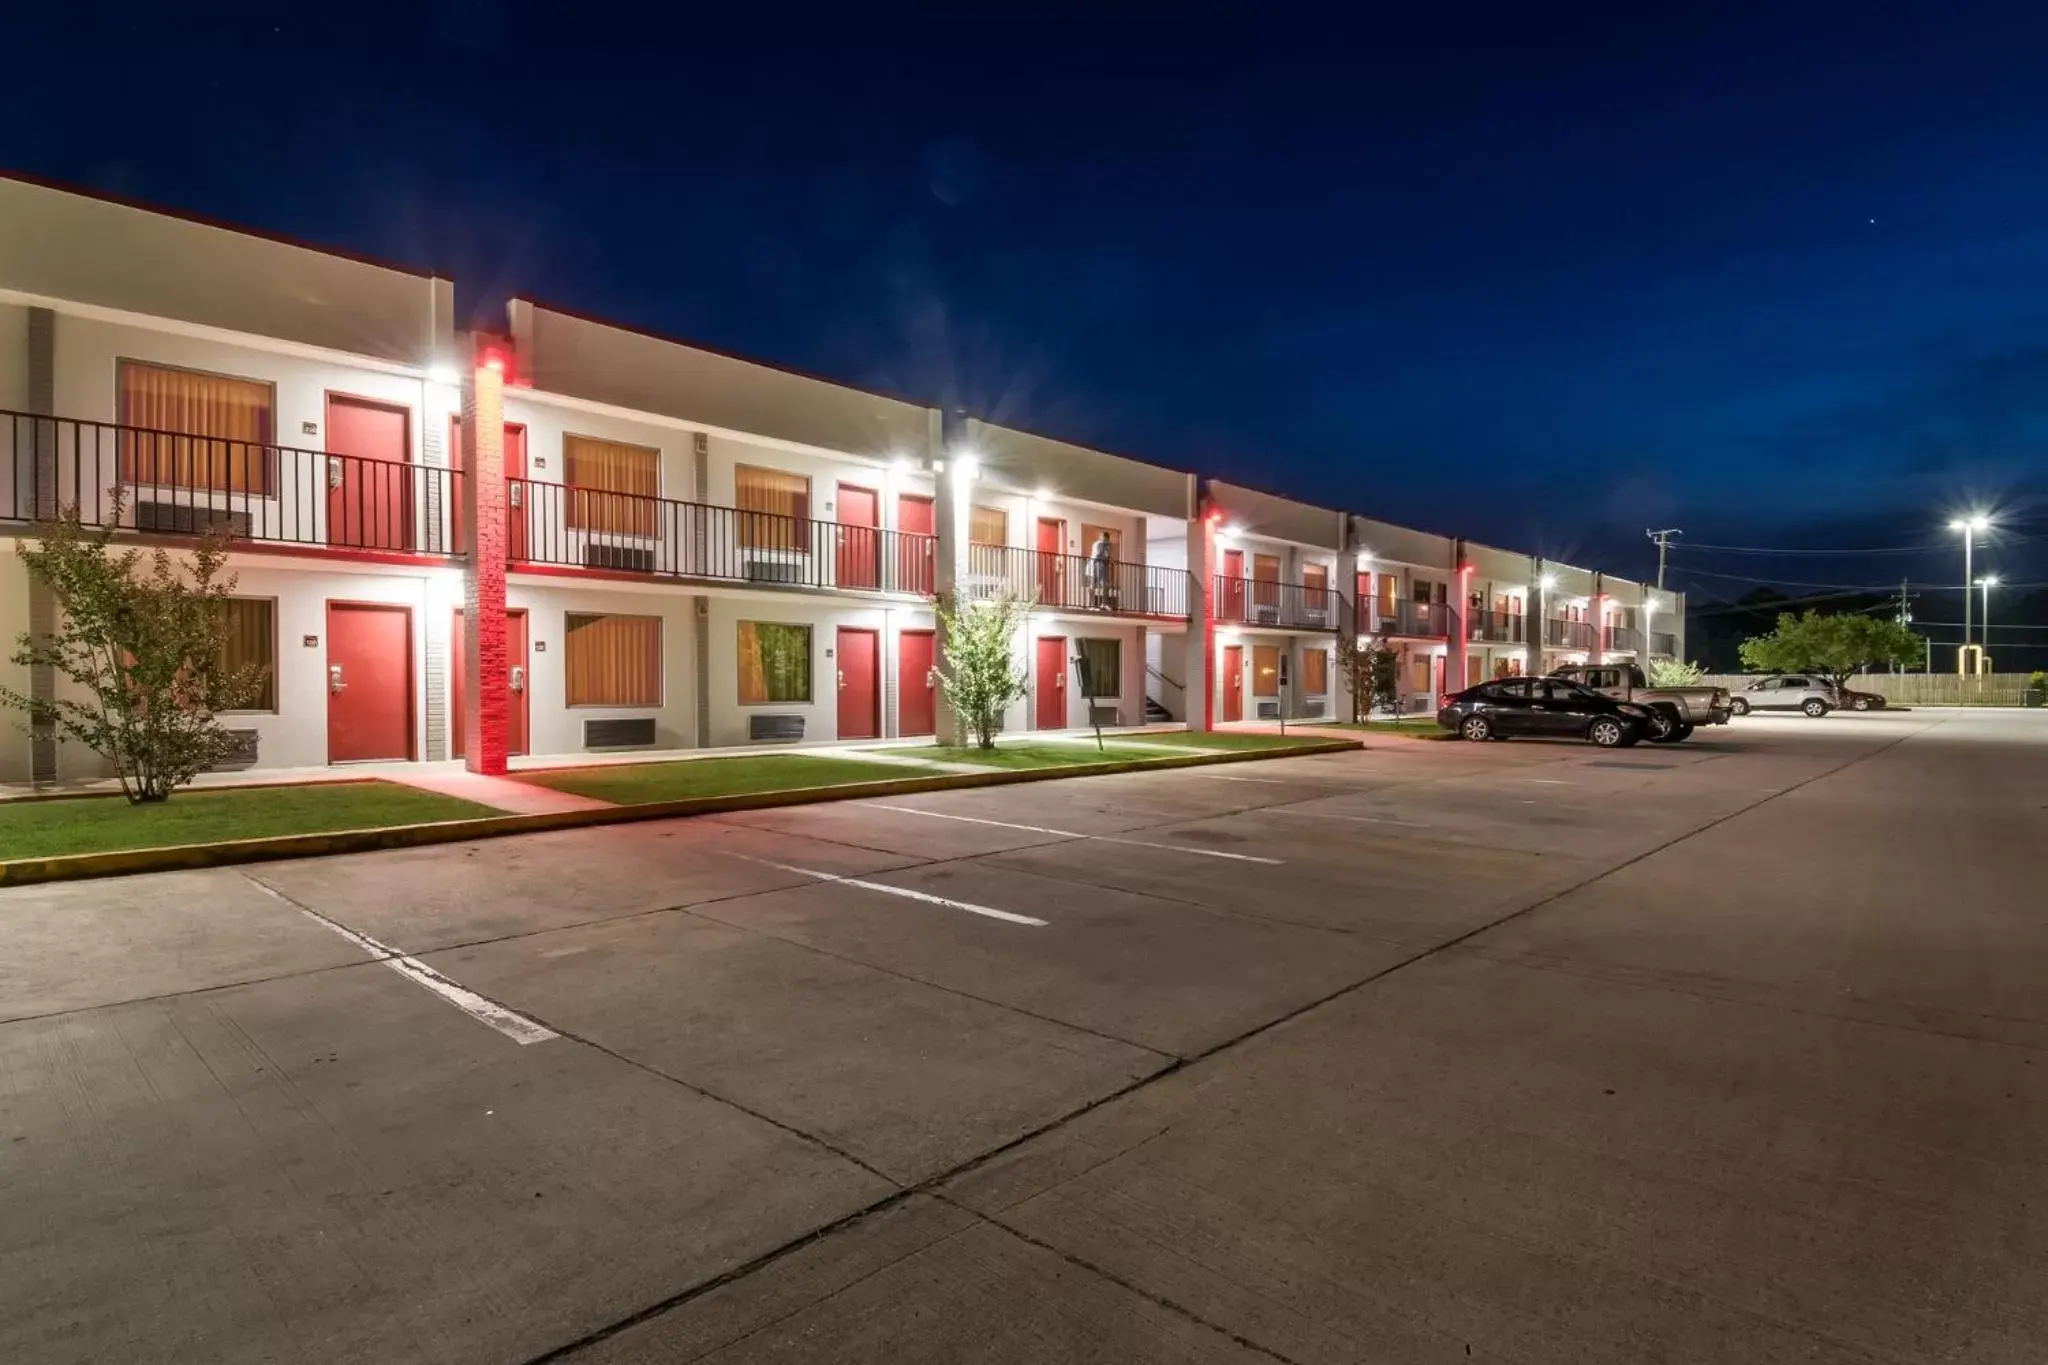 Property Building in Red Roof Inn Gulfport - Biloxi Airport